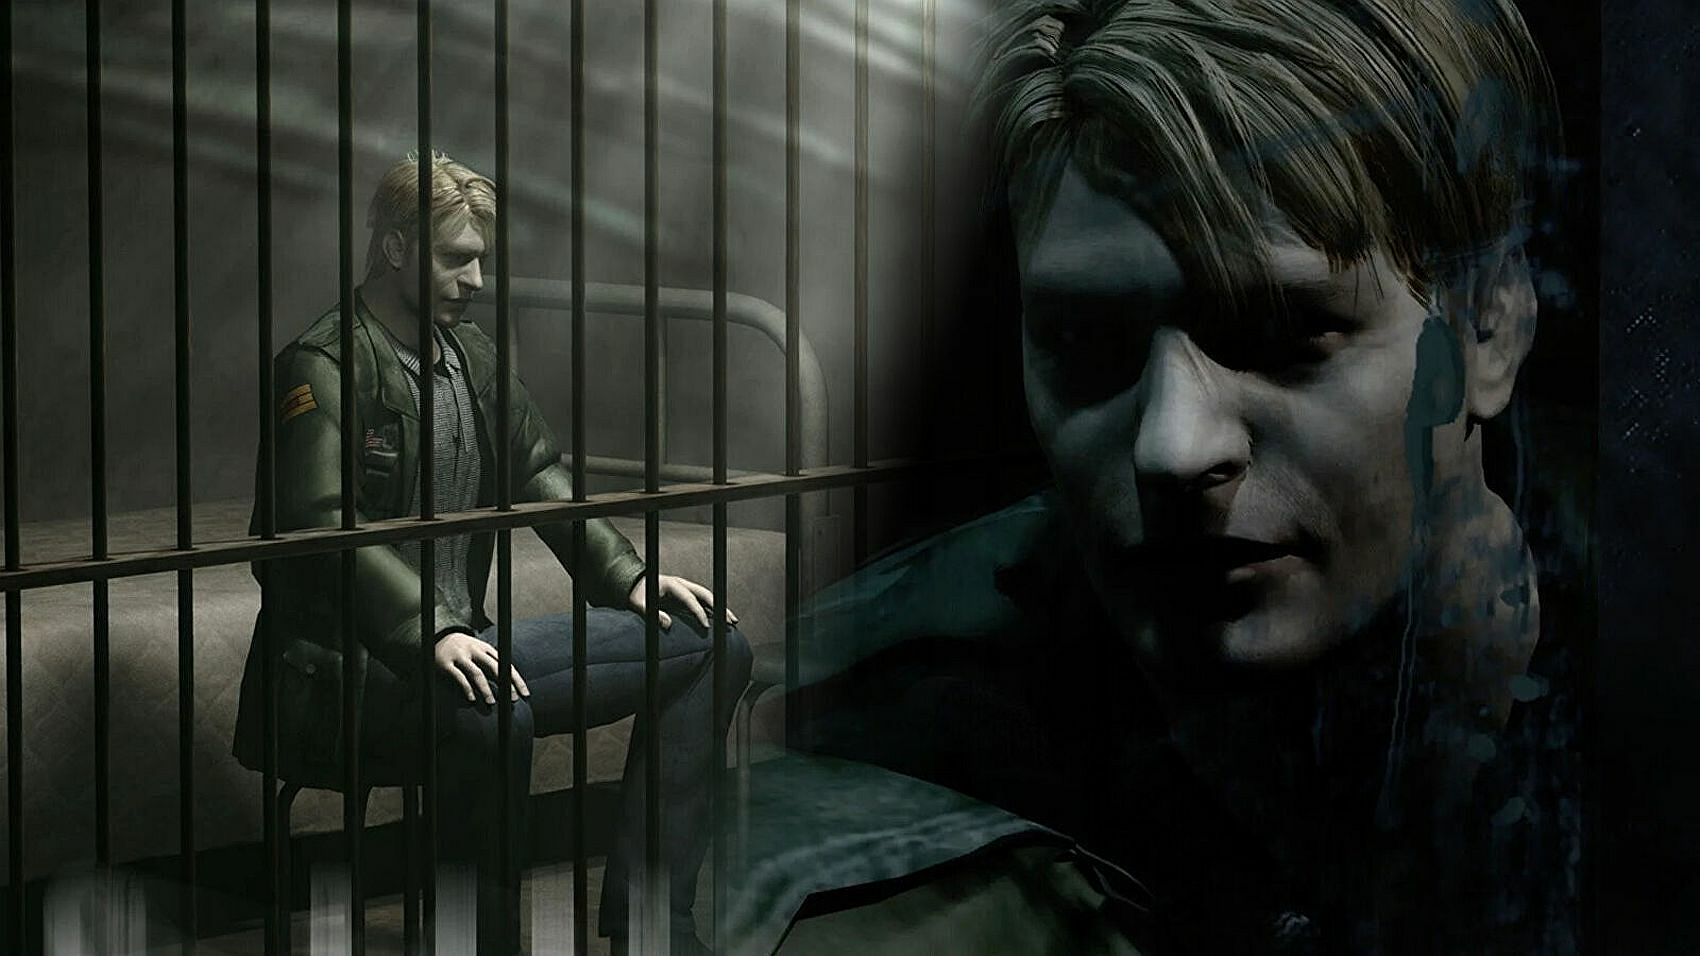 Silent Hill film director claims Bloober Team is working on the Silent Hill 2 remake